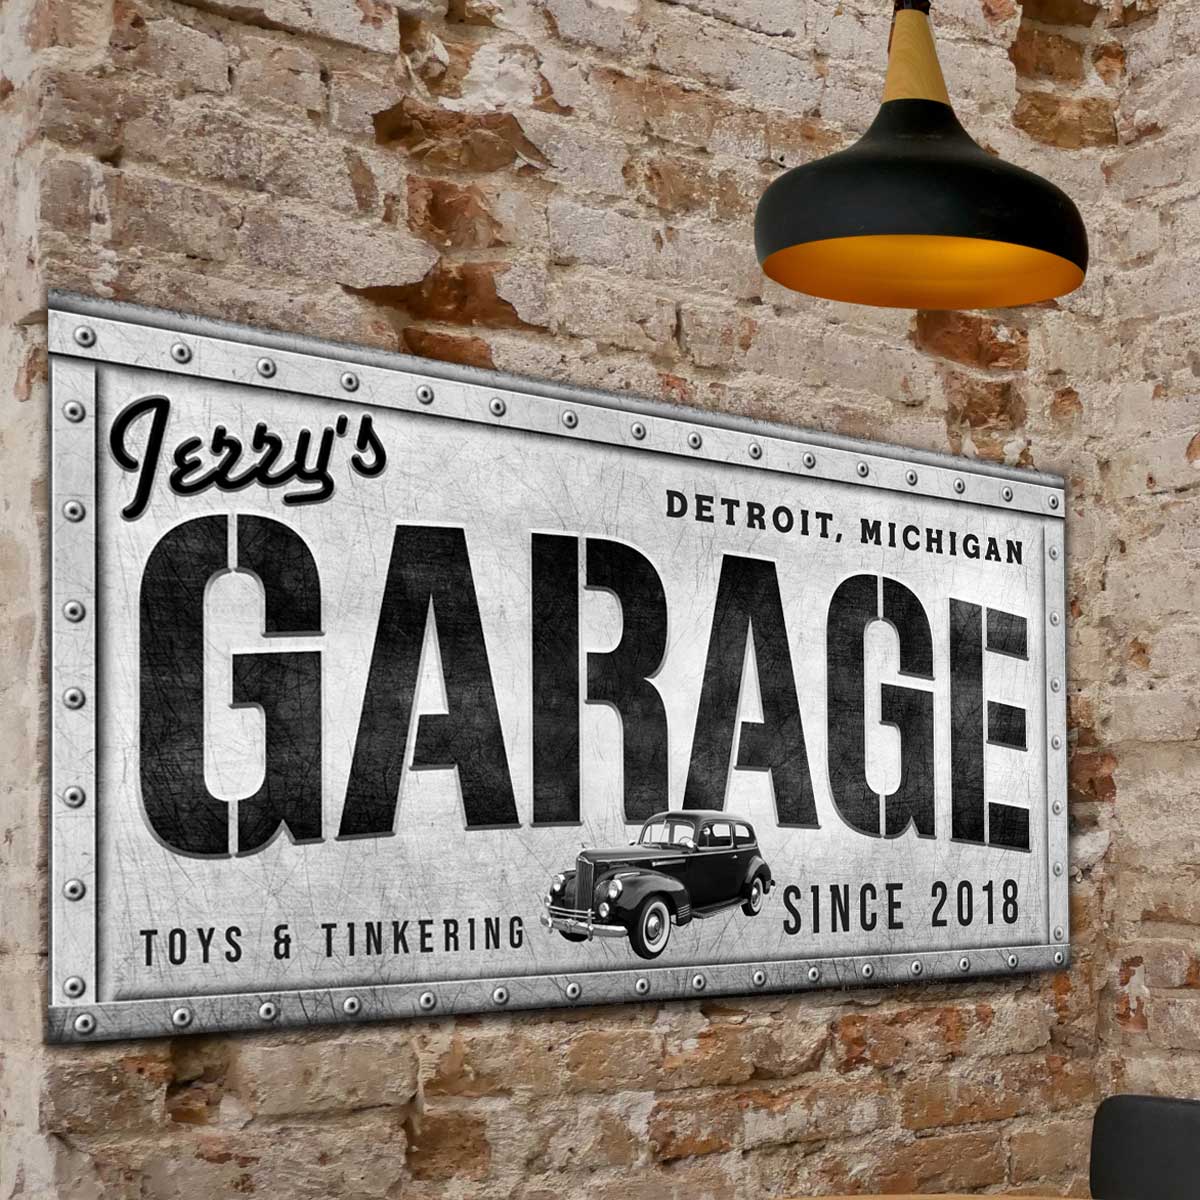 garage sign made of metal with rivets and the words, Jerry garage, city and state, toys and tinkering, with est. date.